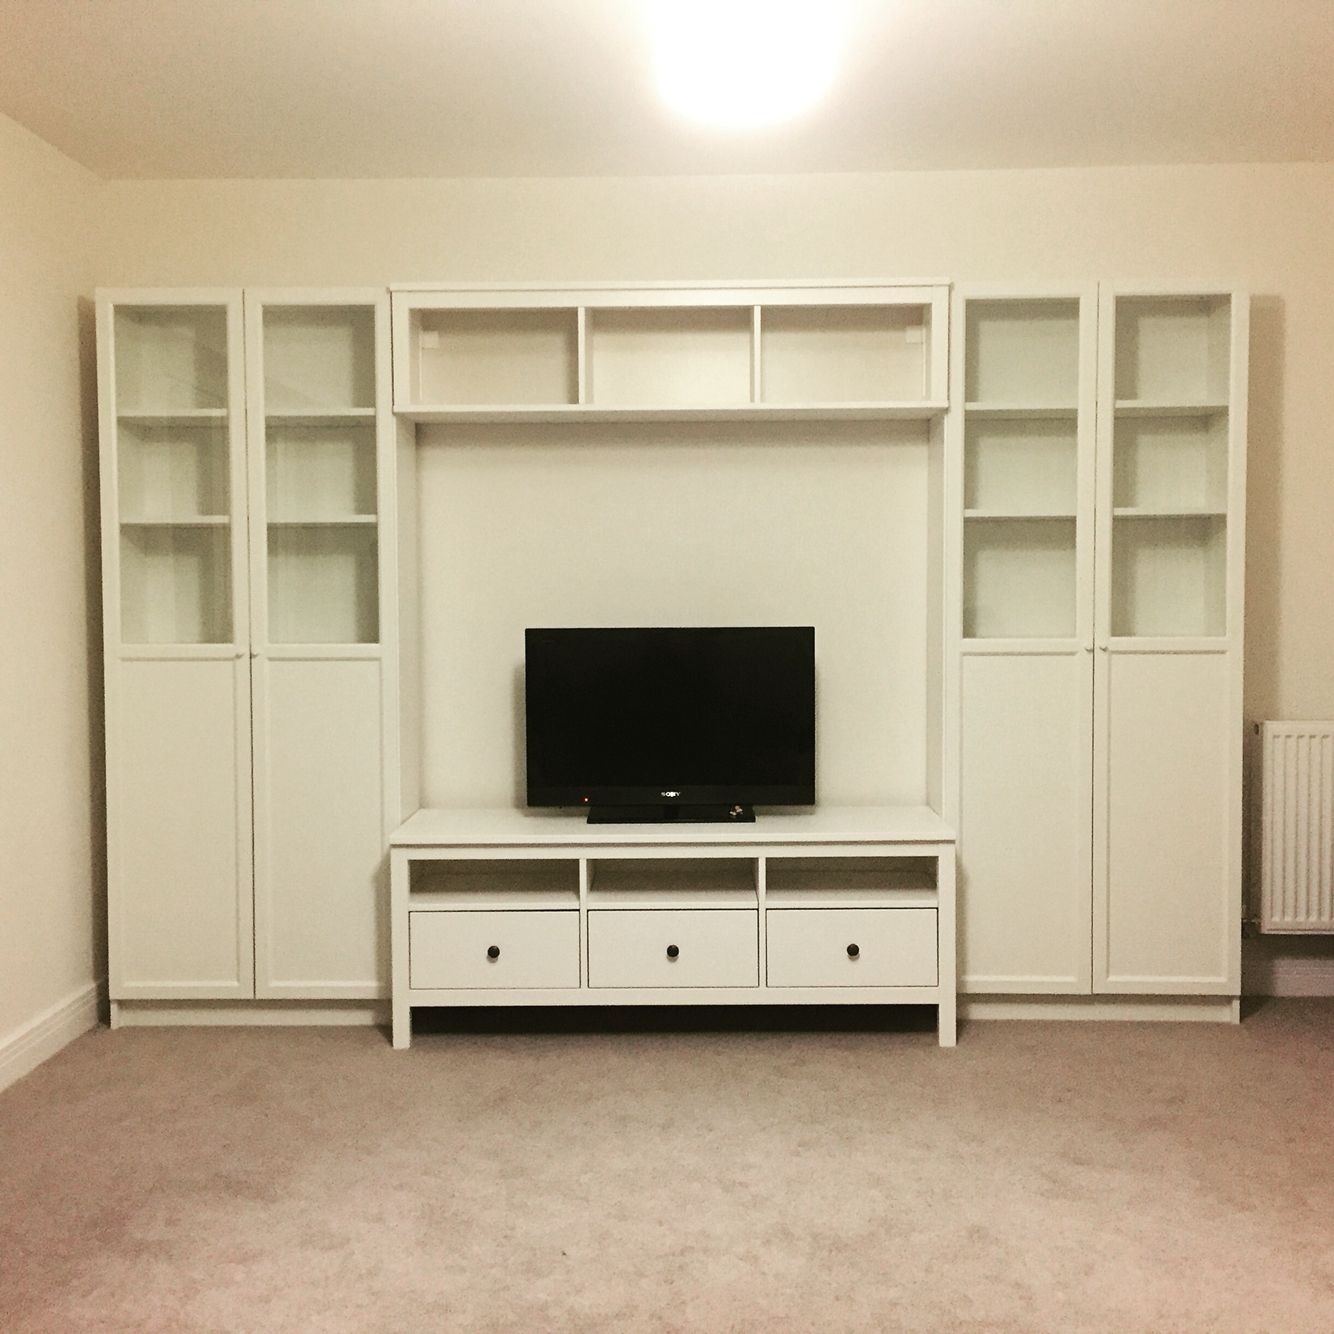 Ikea Storage System Hemnes Tv Standbench Billy Bookcase In White With Regard To Bookcase With Tv Storage (View 8 of 15)